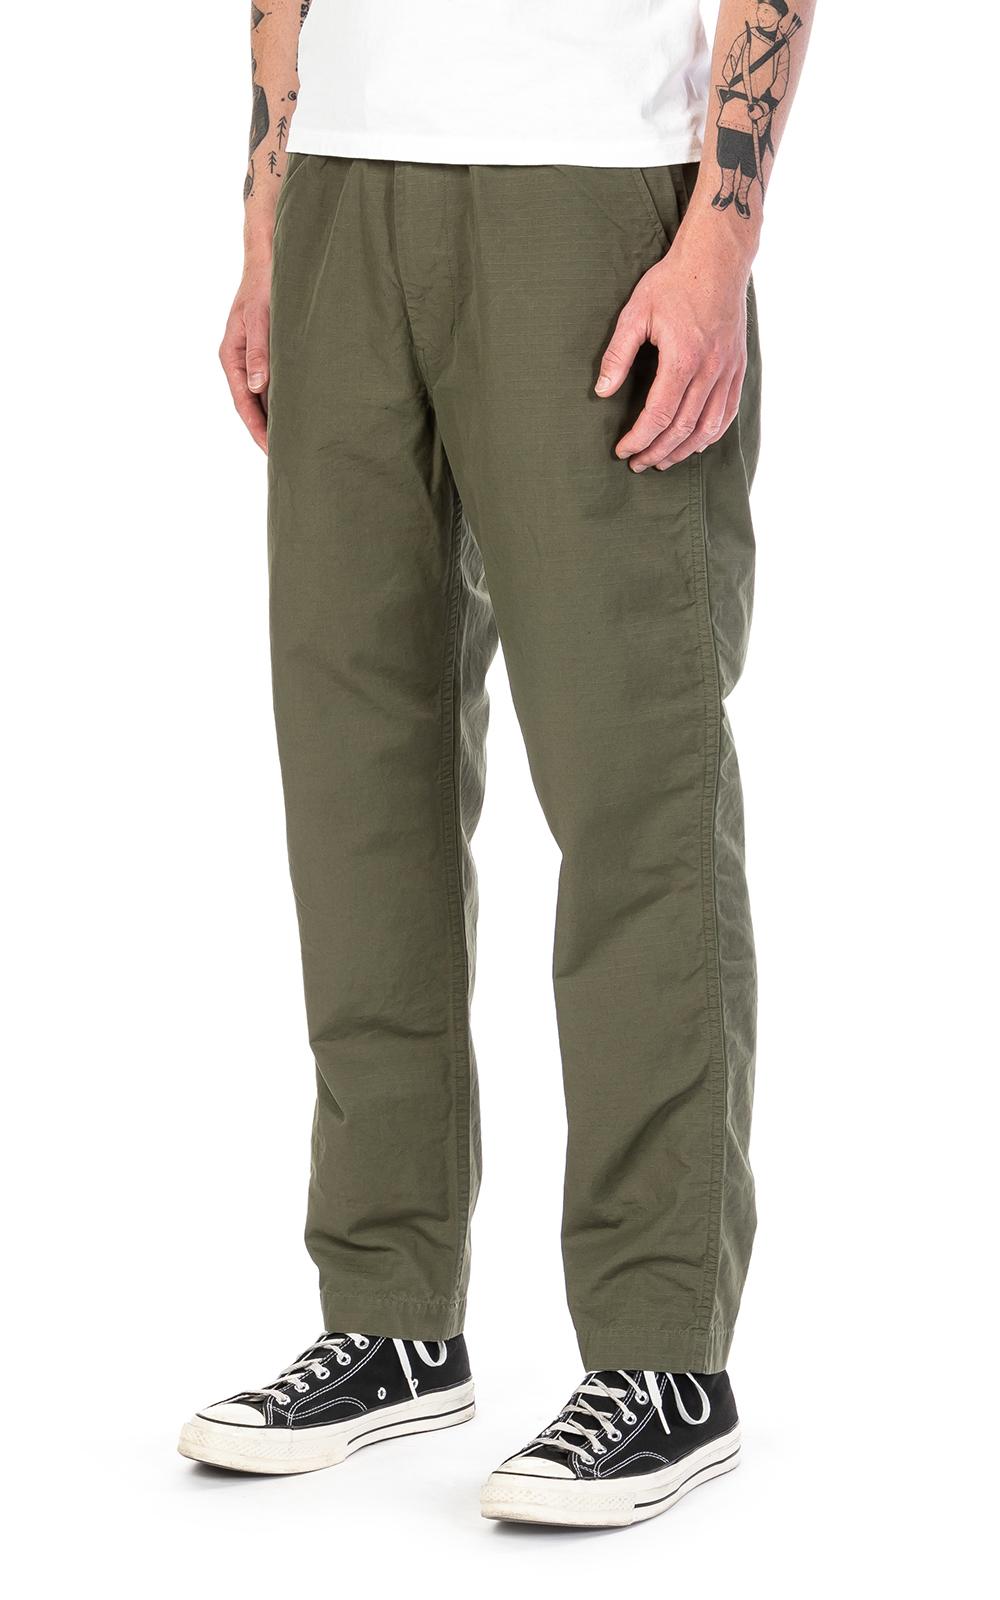 Orslow Cotton New Yorker Pants Army Green for Men - Lyst